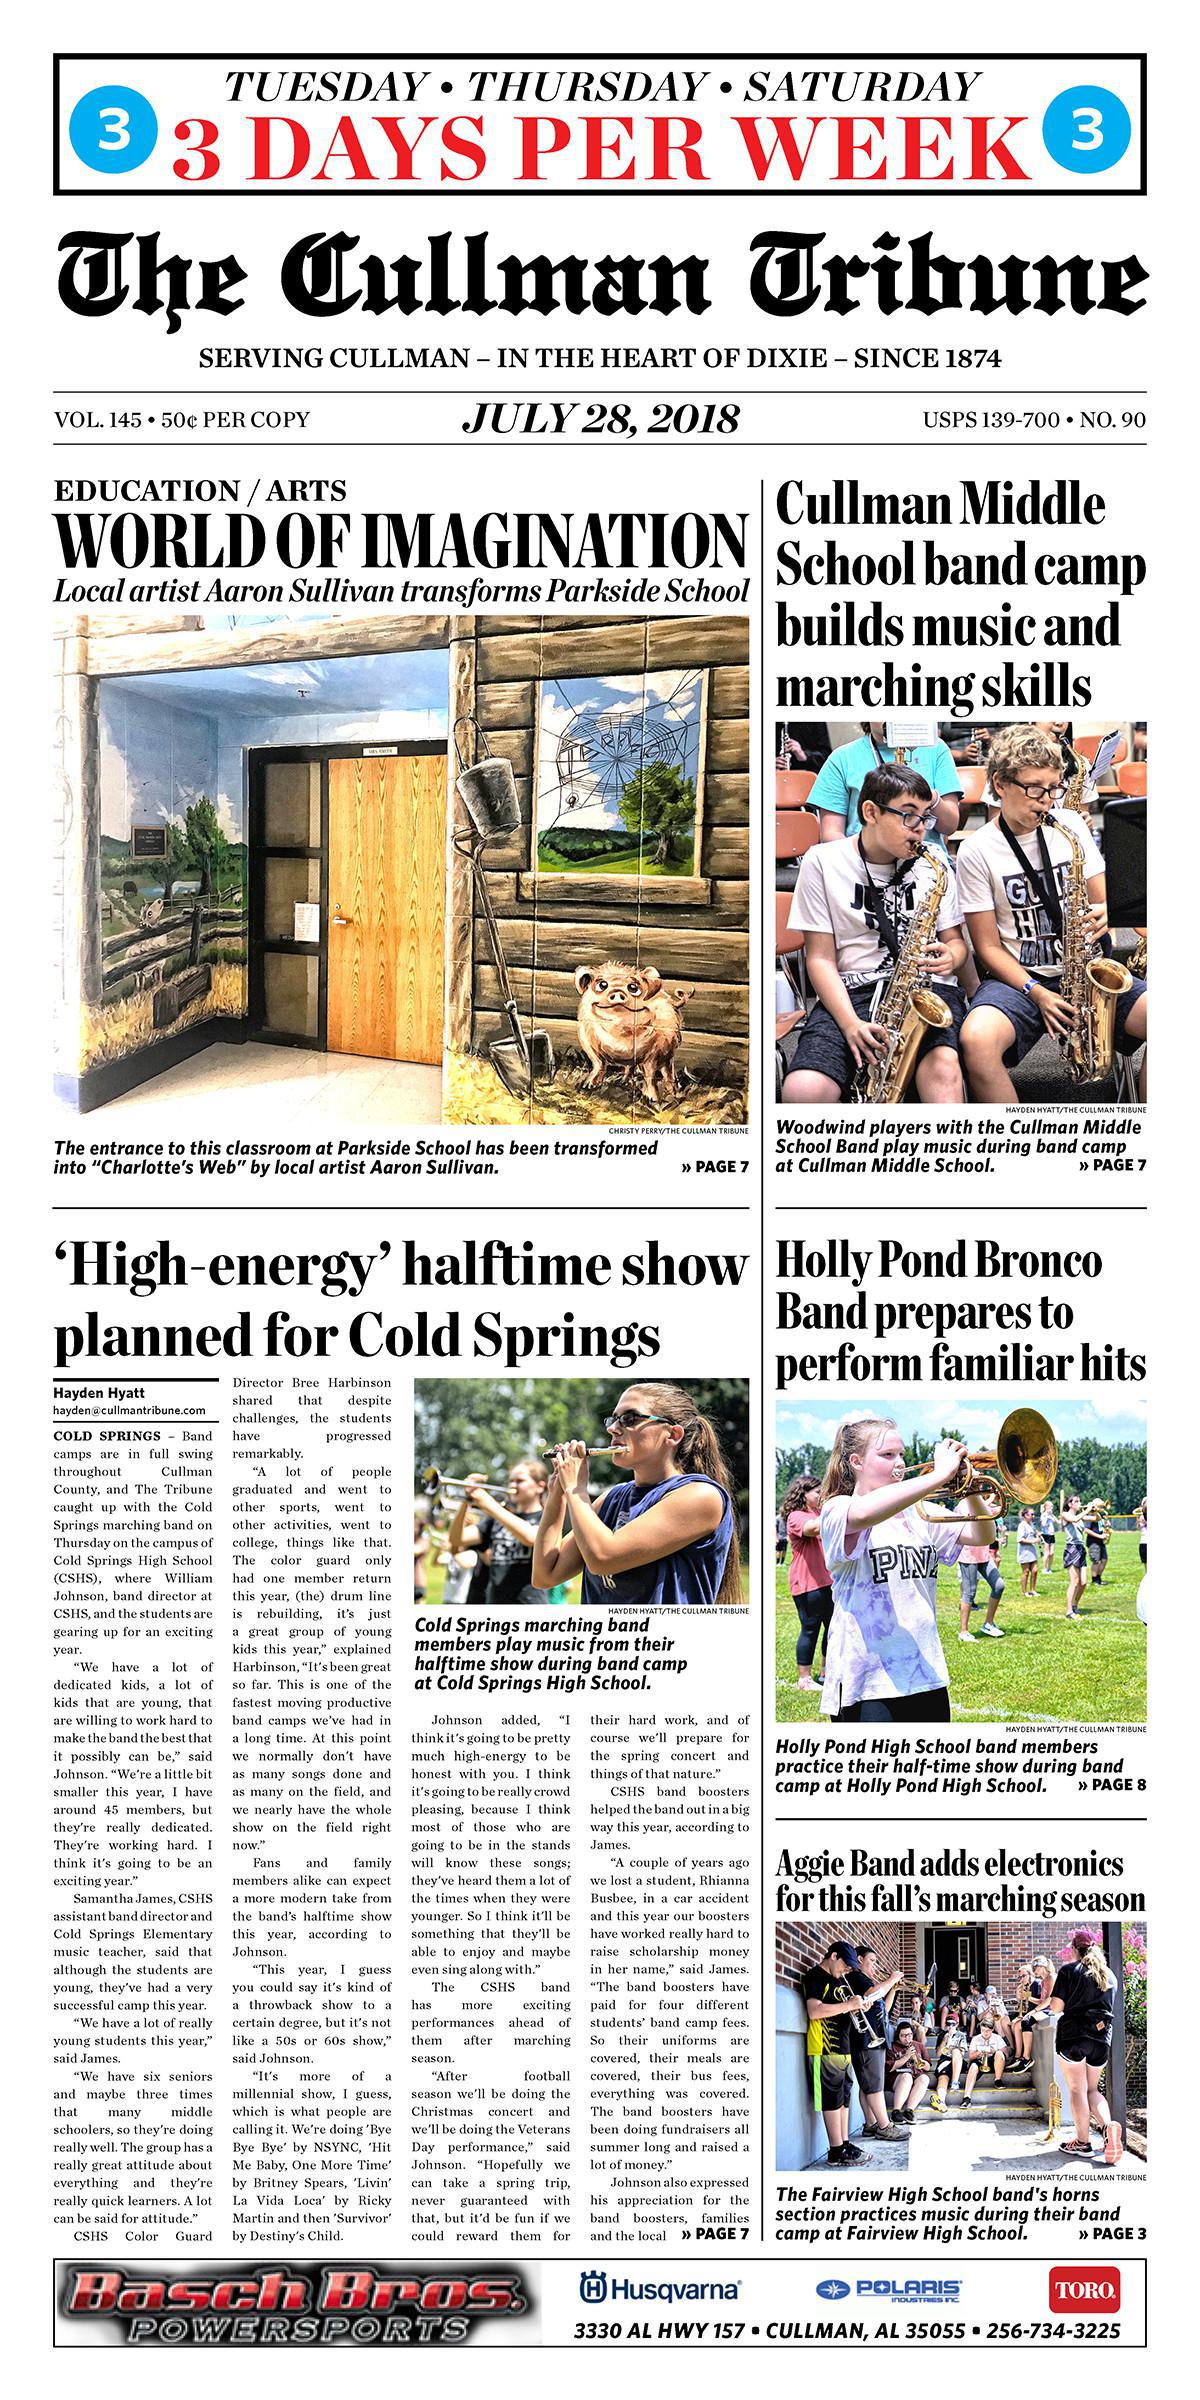 Good Morning Cullman! The 07-28-2018 edition of the Cullman Tribune is now ready to view